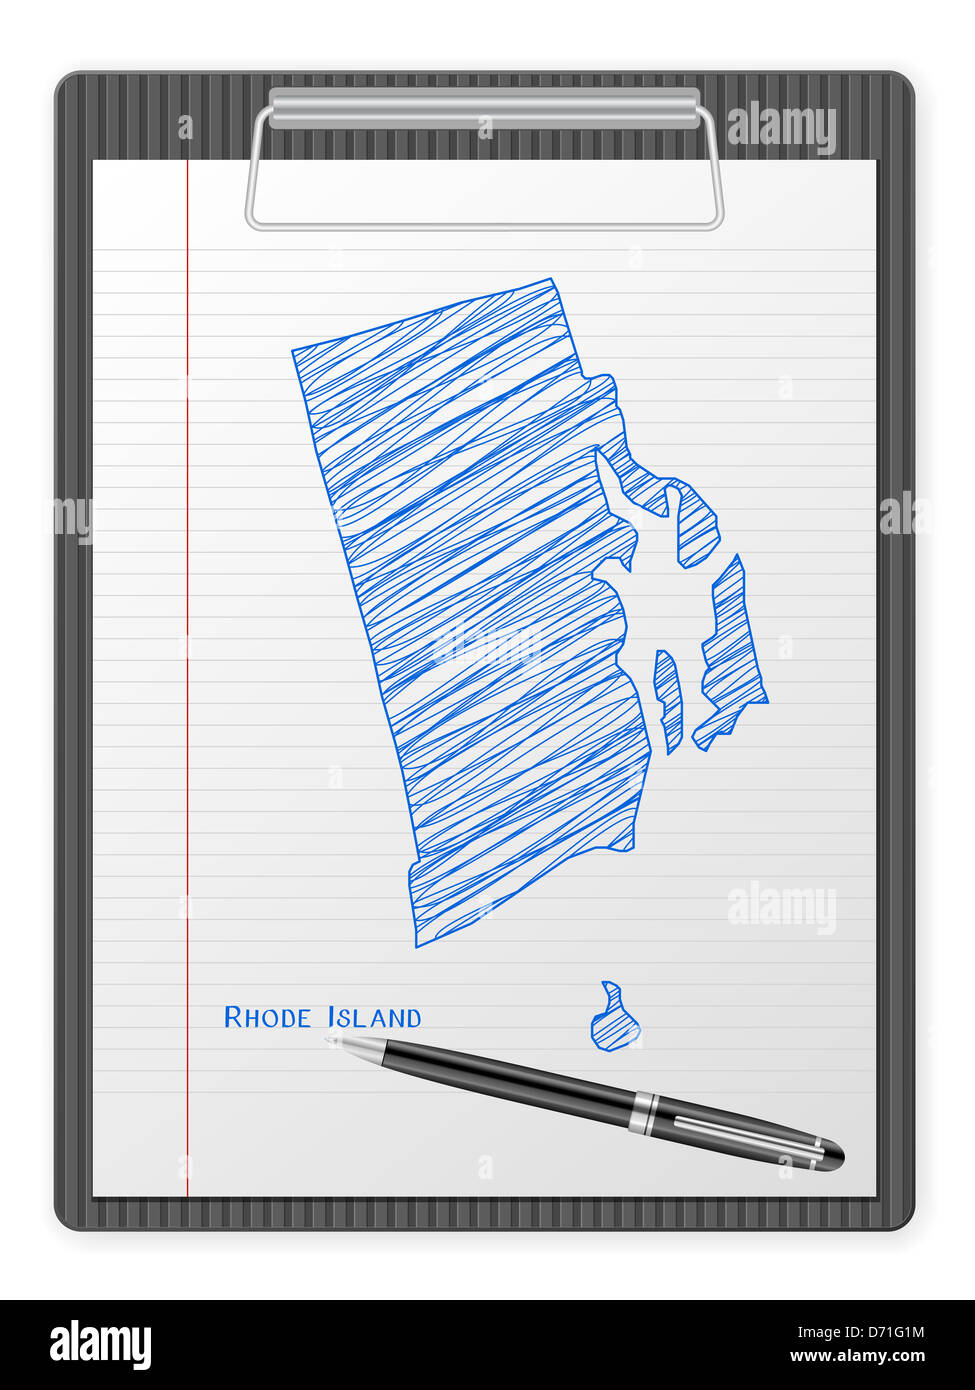 Clipboard with drawing Rhode Island map. Vector illustration. Stock Photo